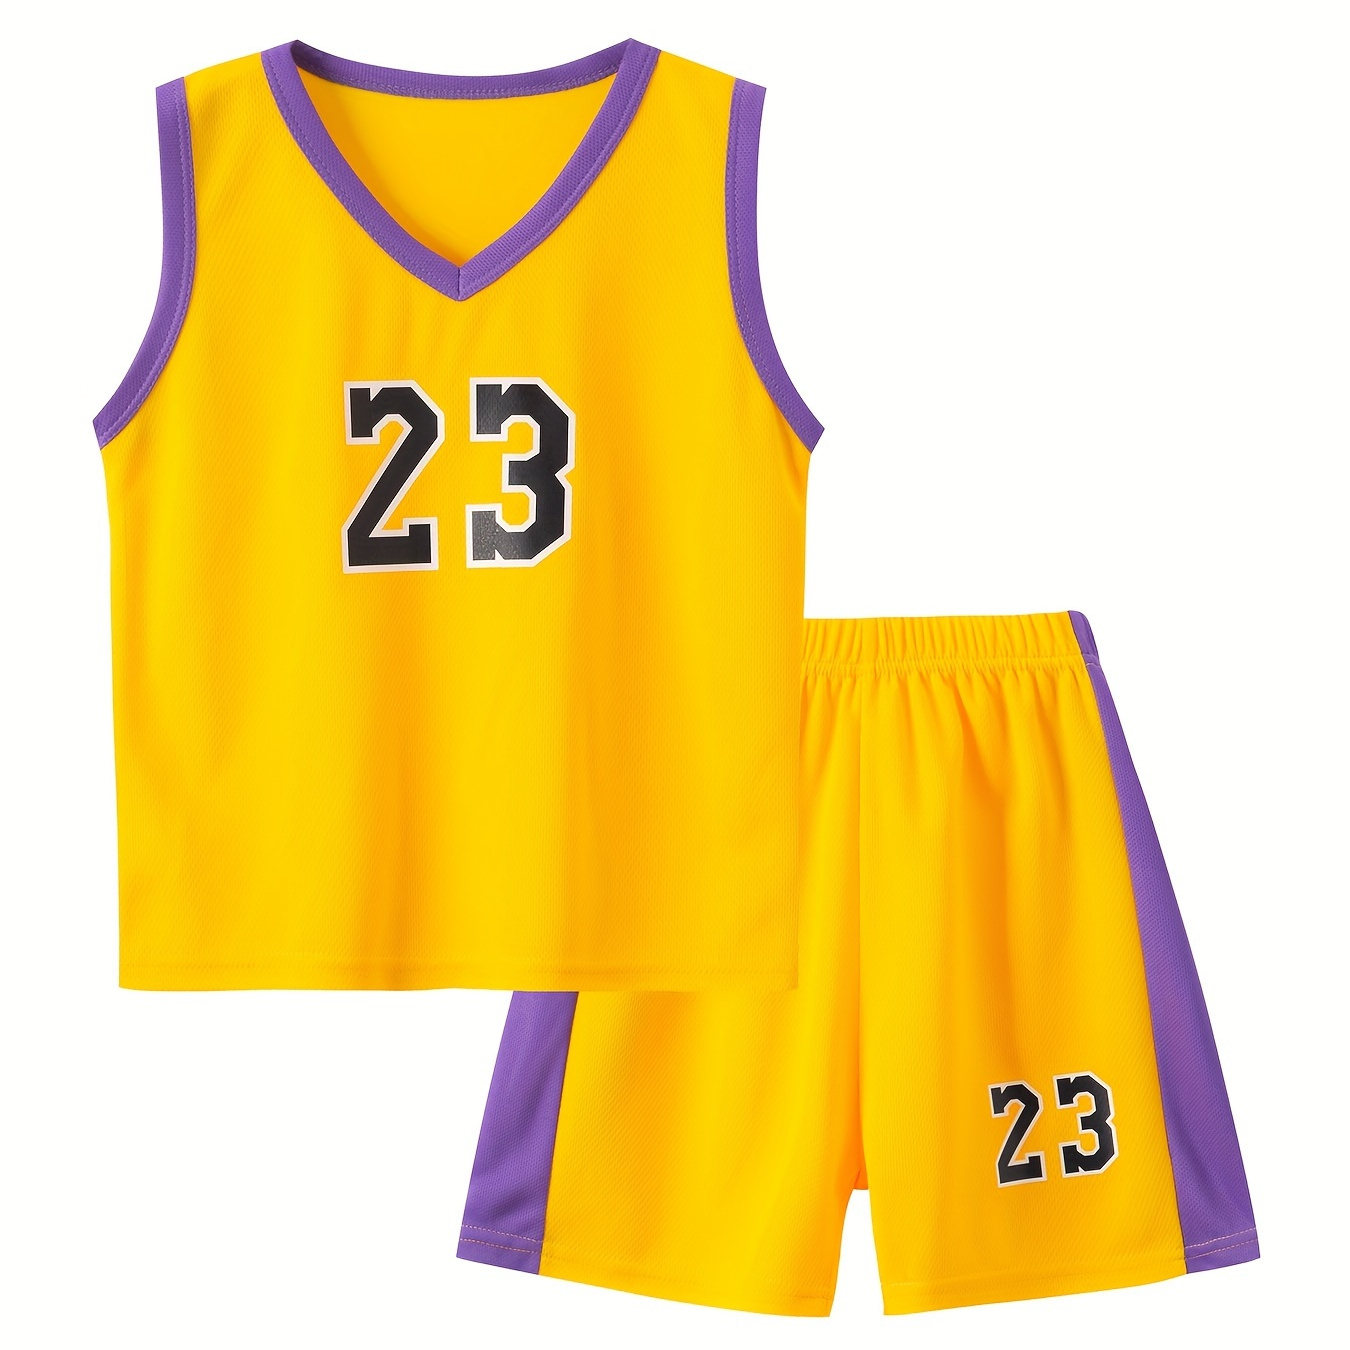 

2pcs Boys Breathable Sports V-neck #23 Basketball Jersey Set, Casual Sleeveless Vest&shorts, Quick-drying Tank Tops And Shorts For Training Competition